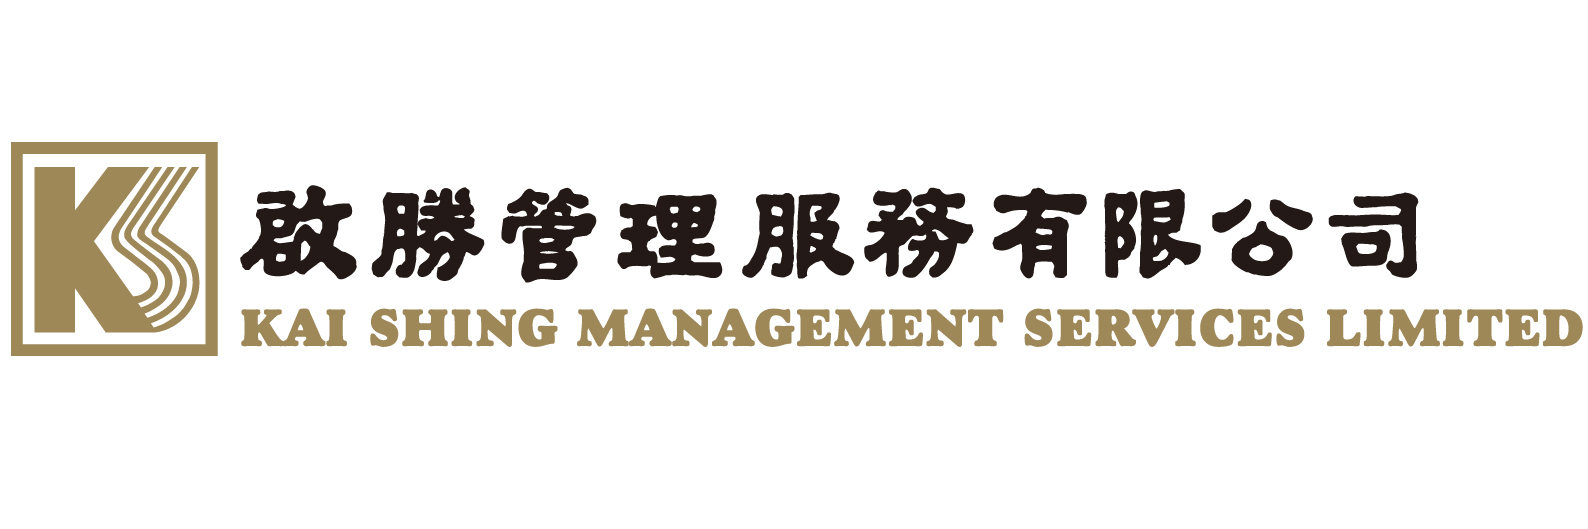 Kai Shing Management Services Limited